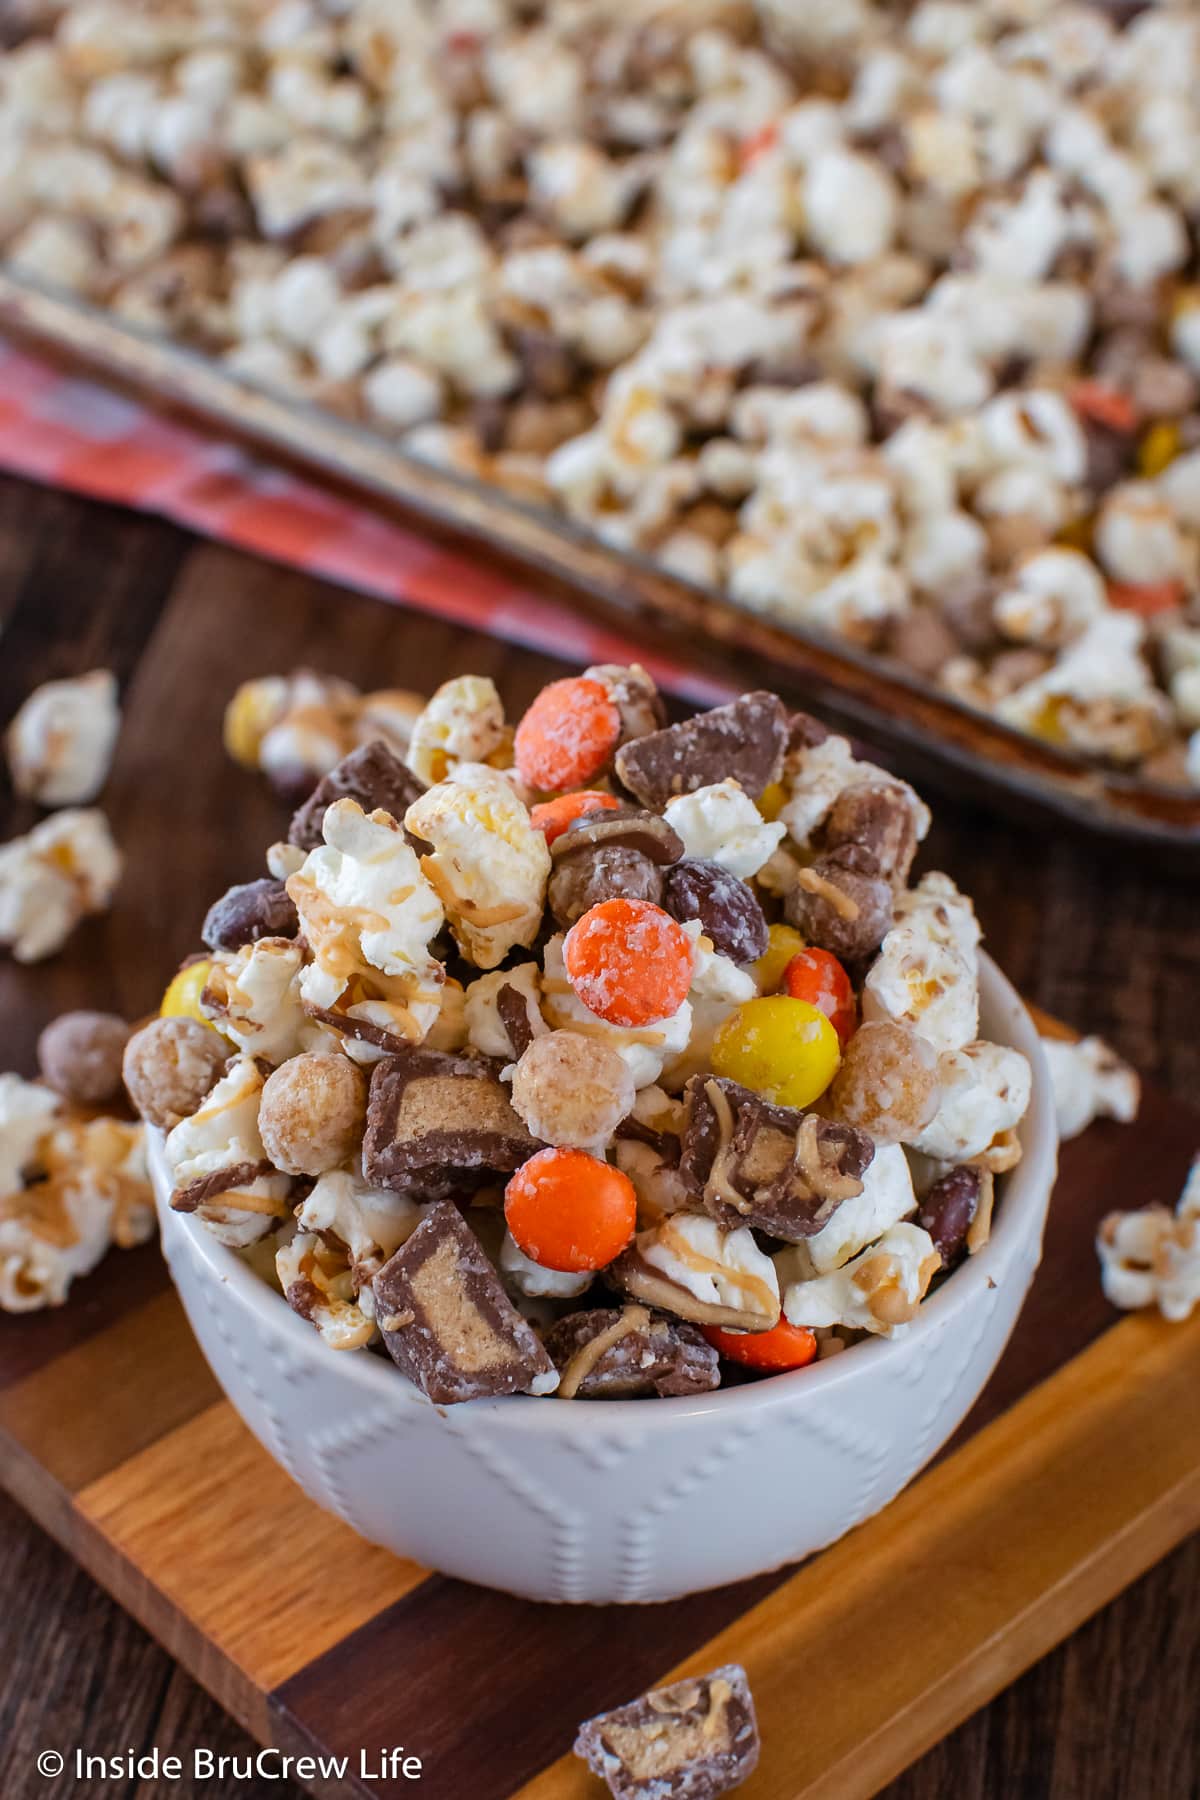 A bowl of candy popcorn on a tray.